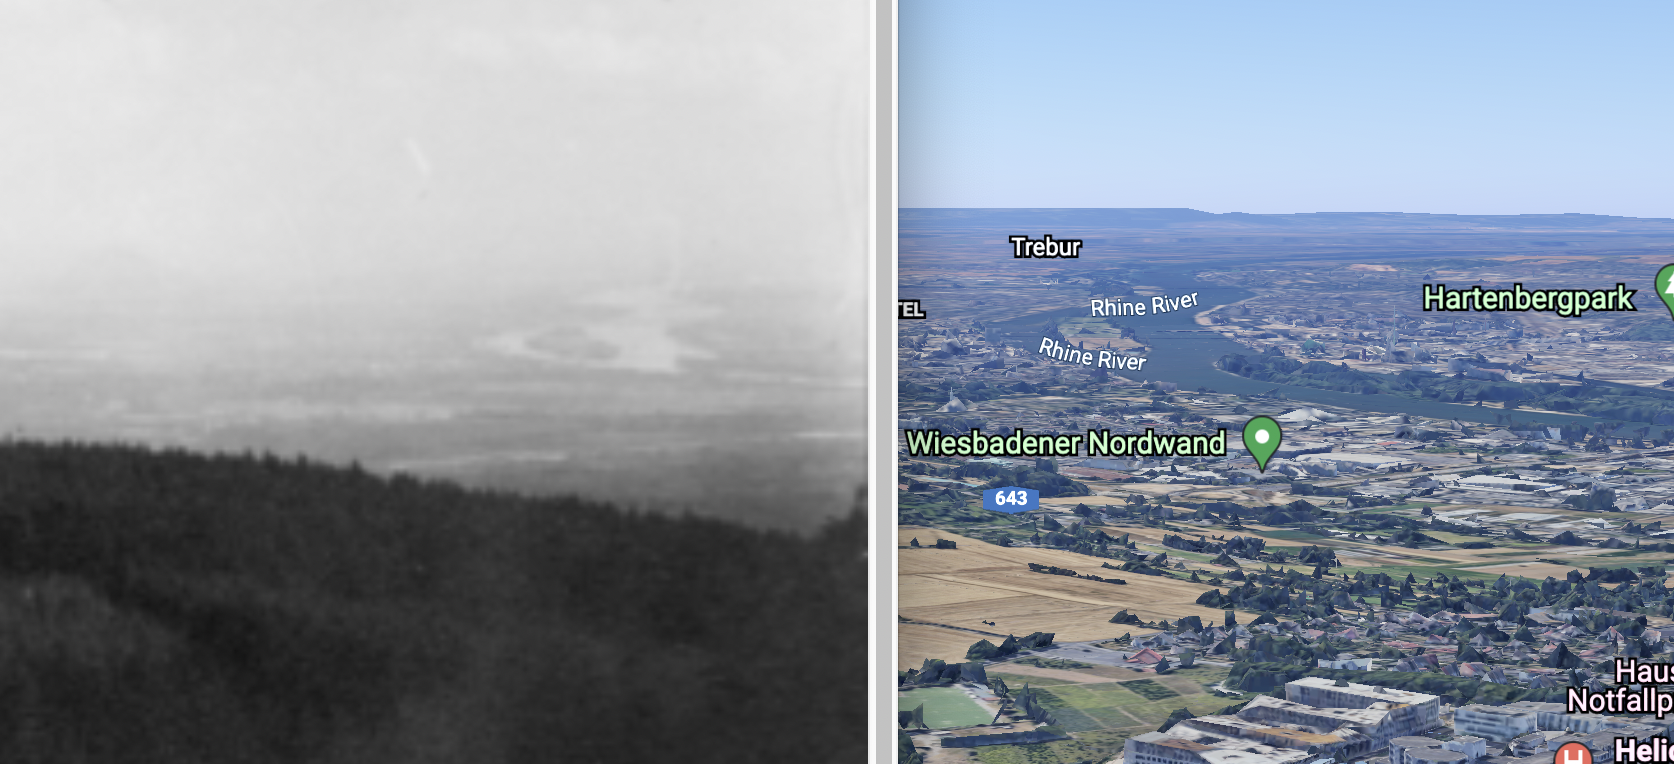 comparison of original image with a screenshot from google earth